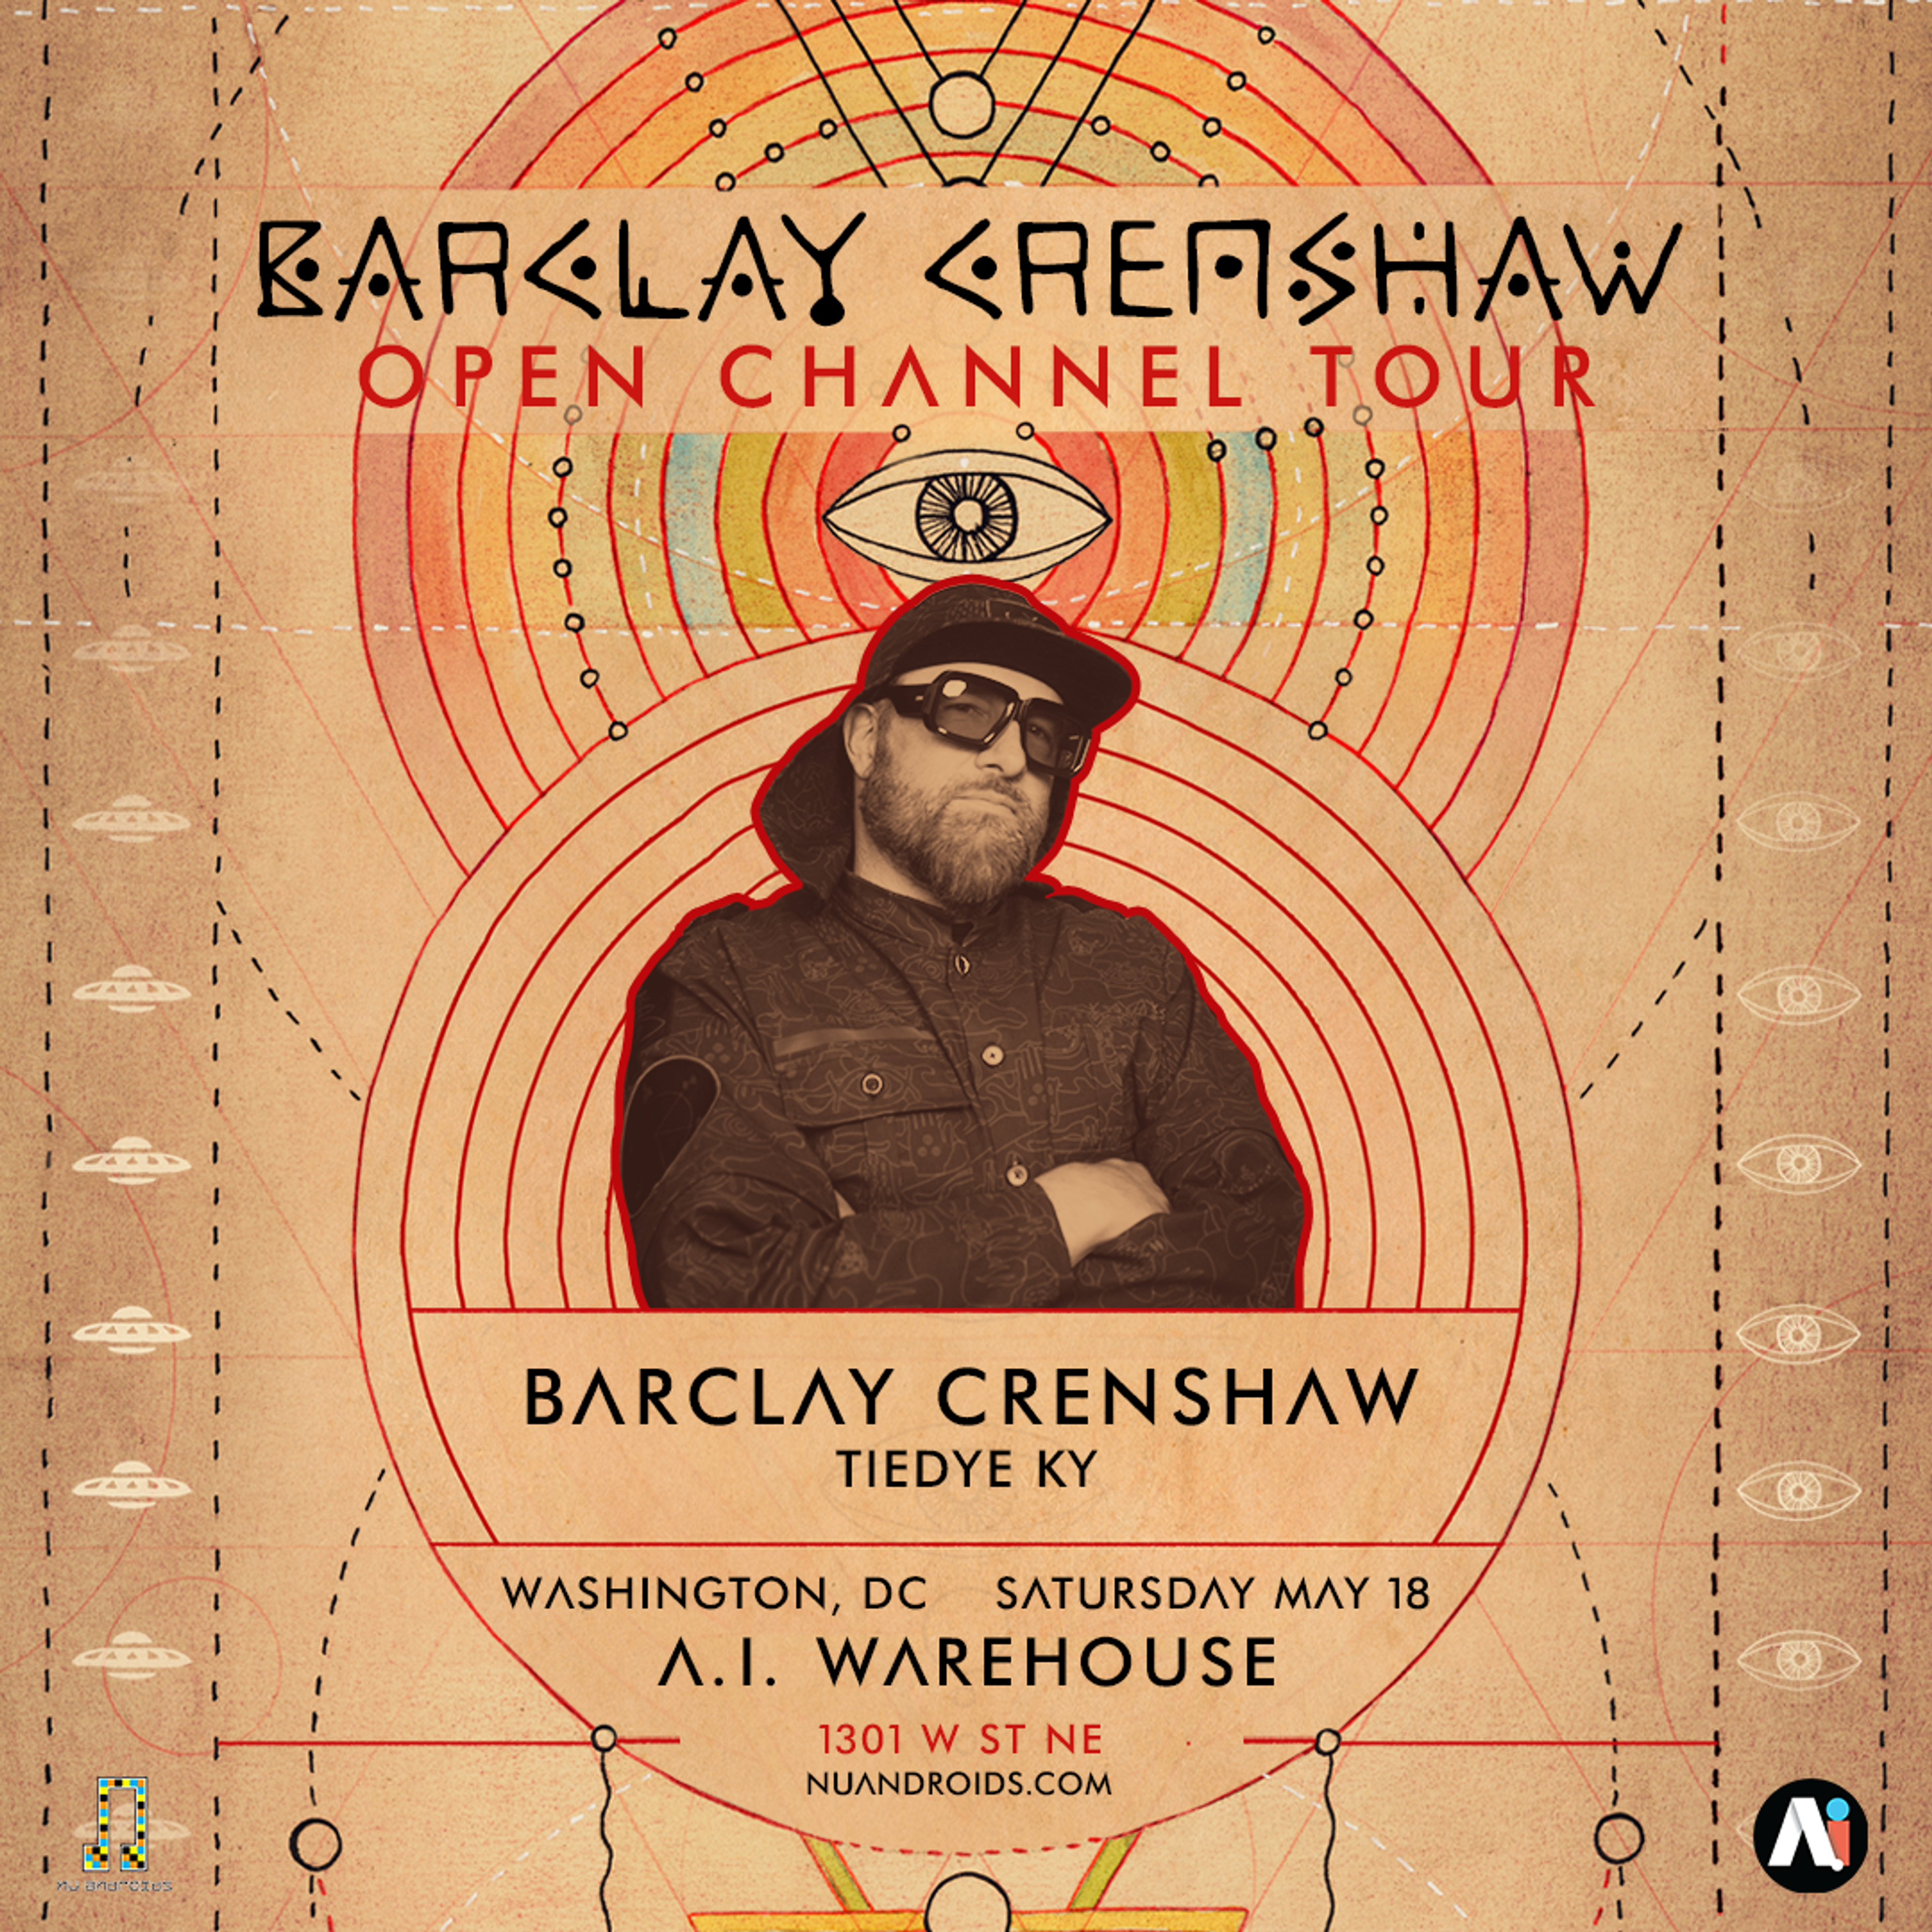 Flyer image for Barclay Crenshaw